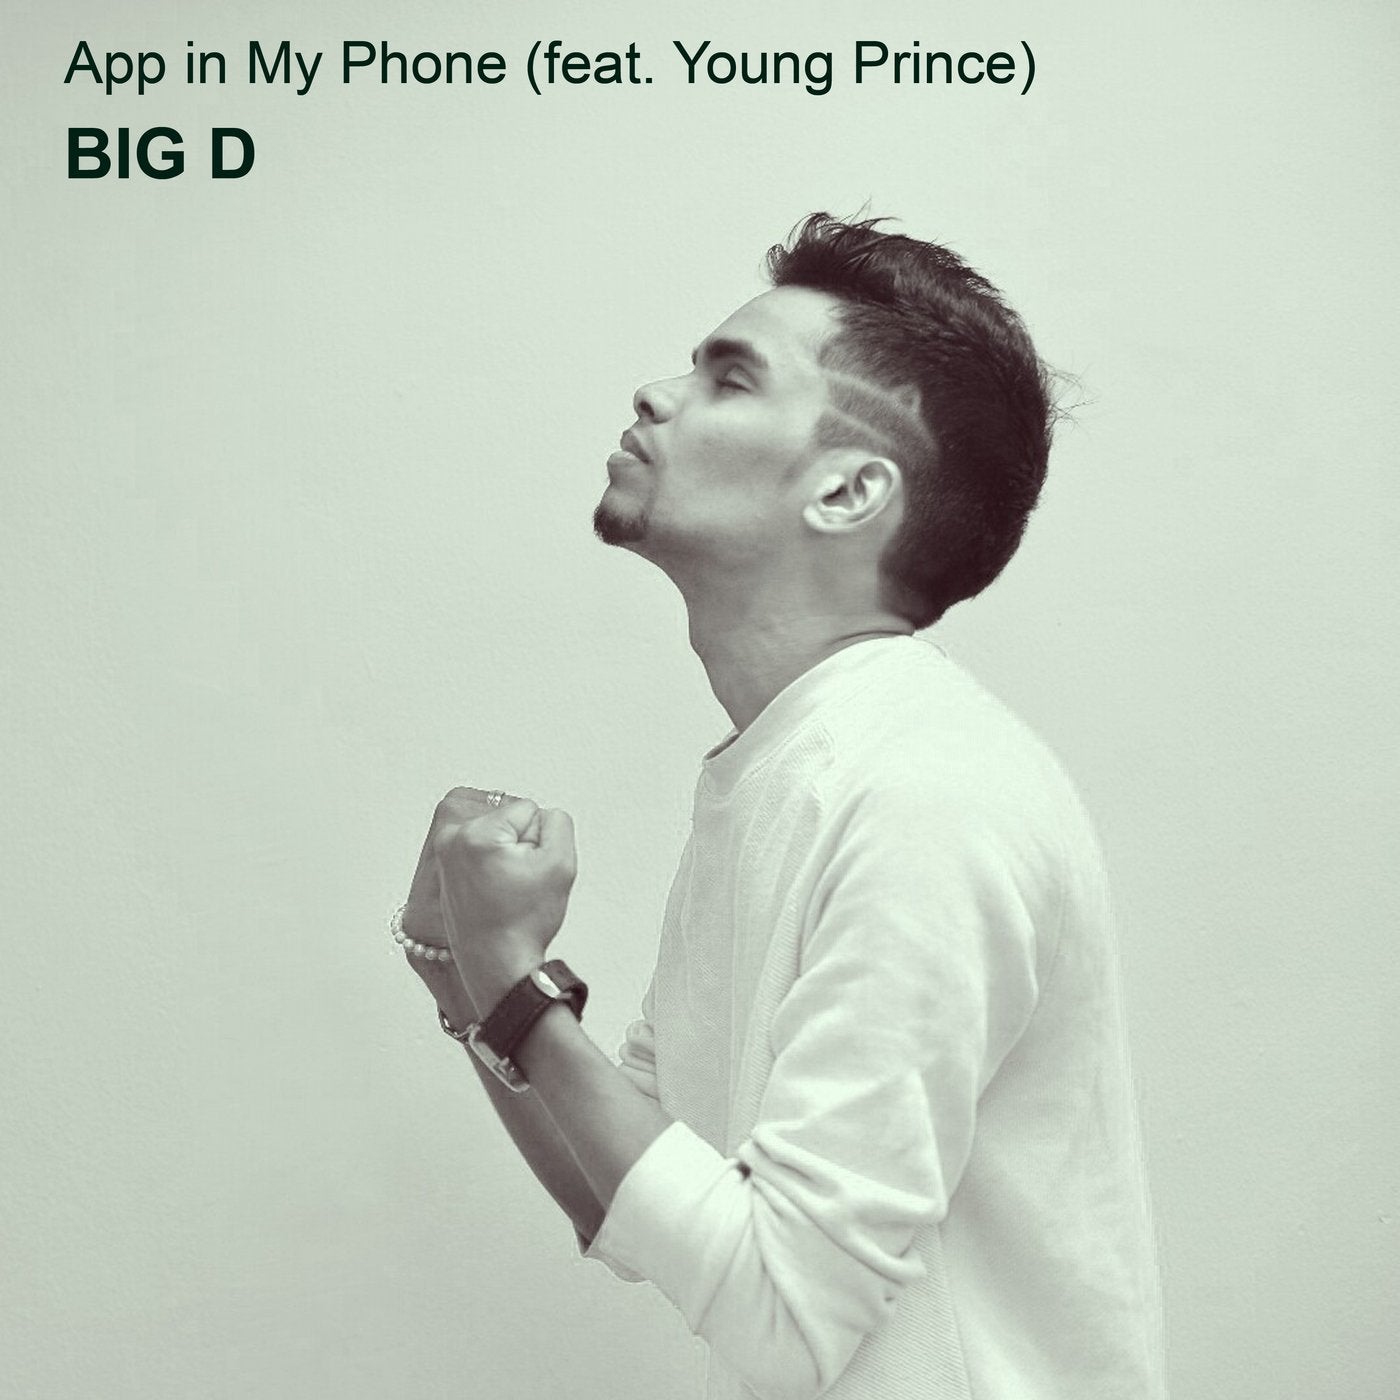 App in My Phone (feat. Young Prince)